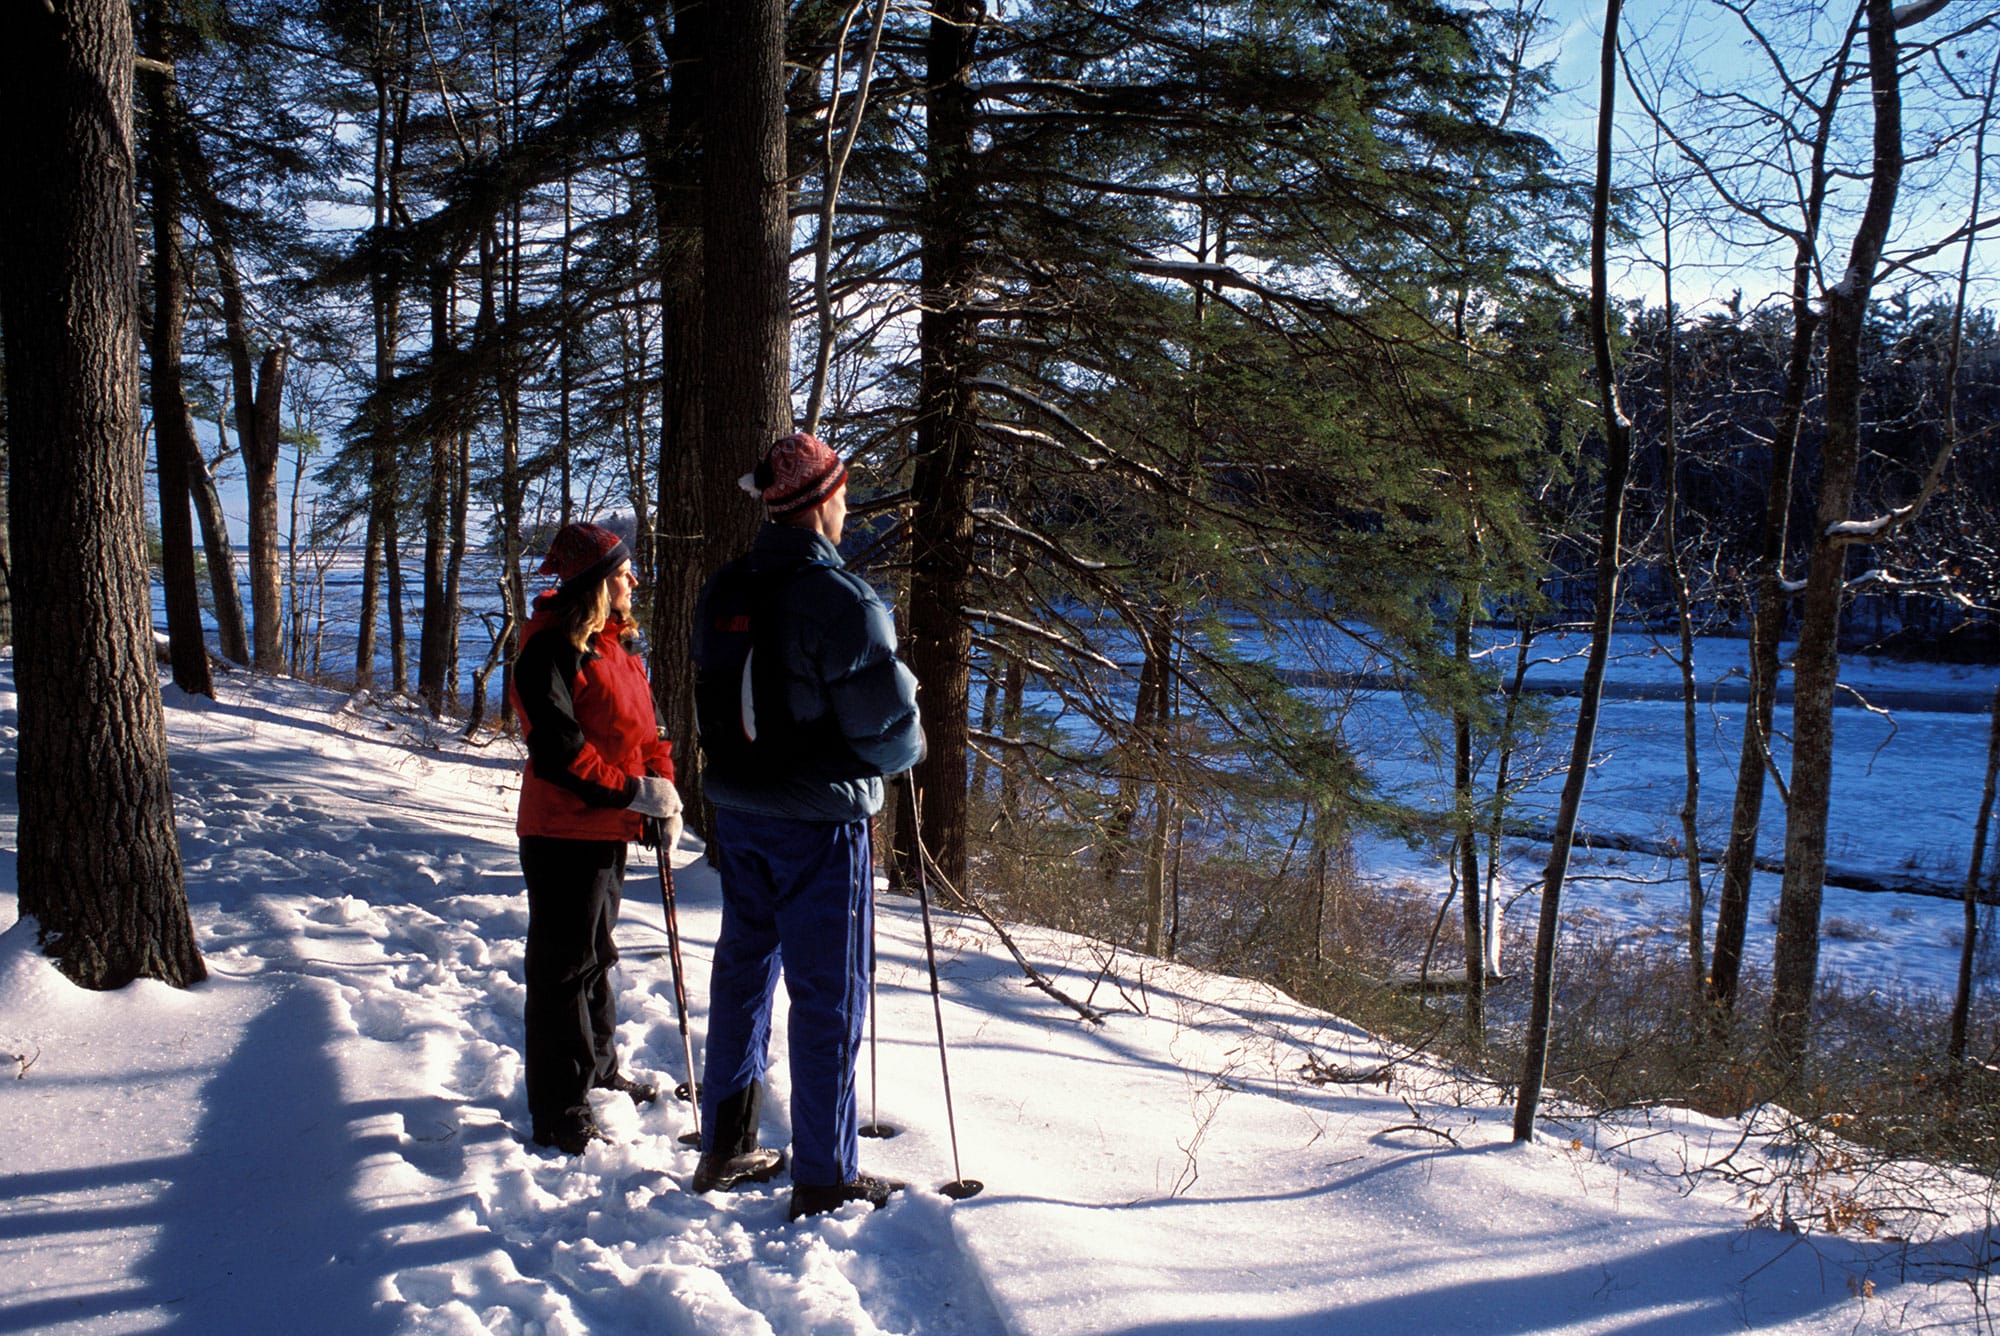 Two people on skis on a snowy trail.